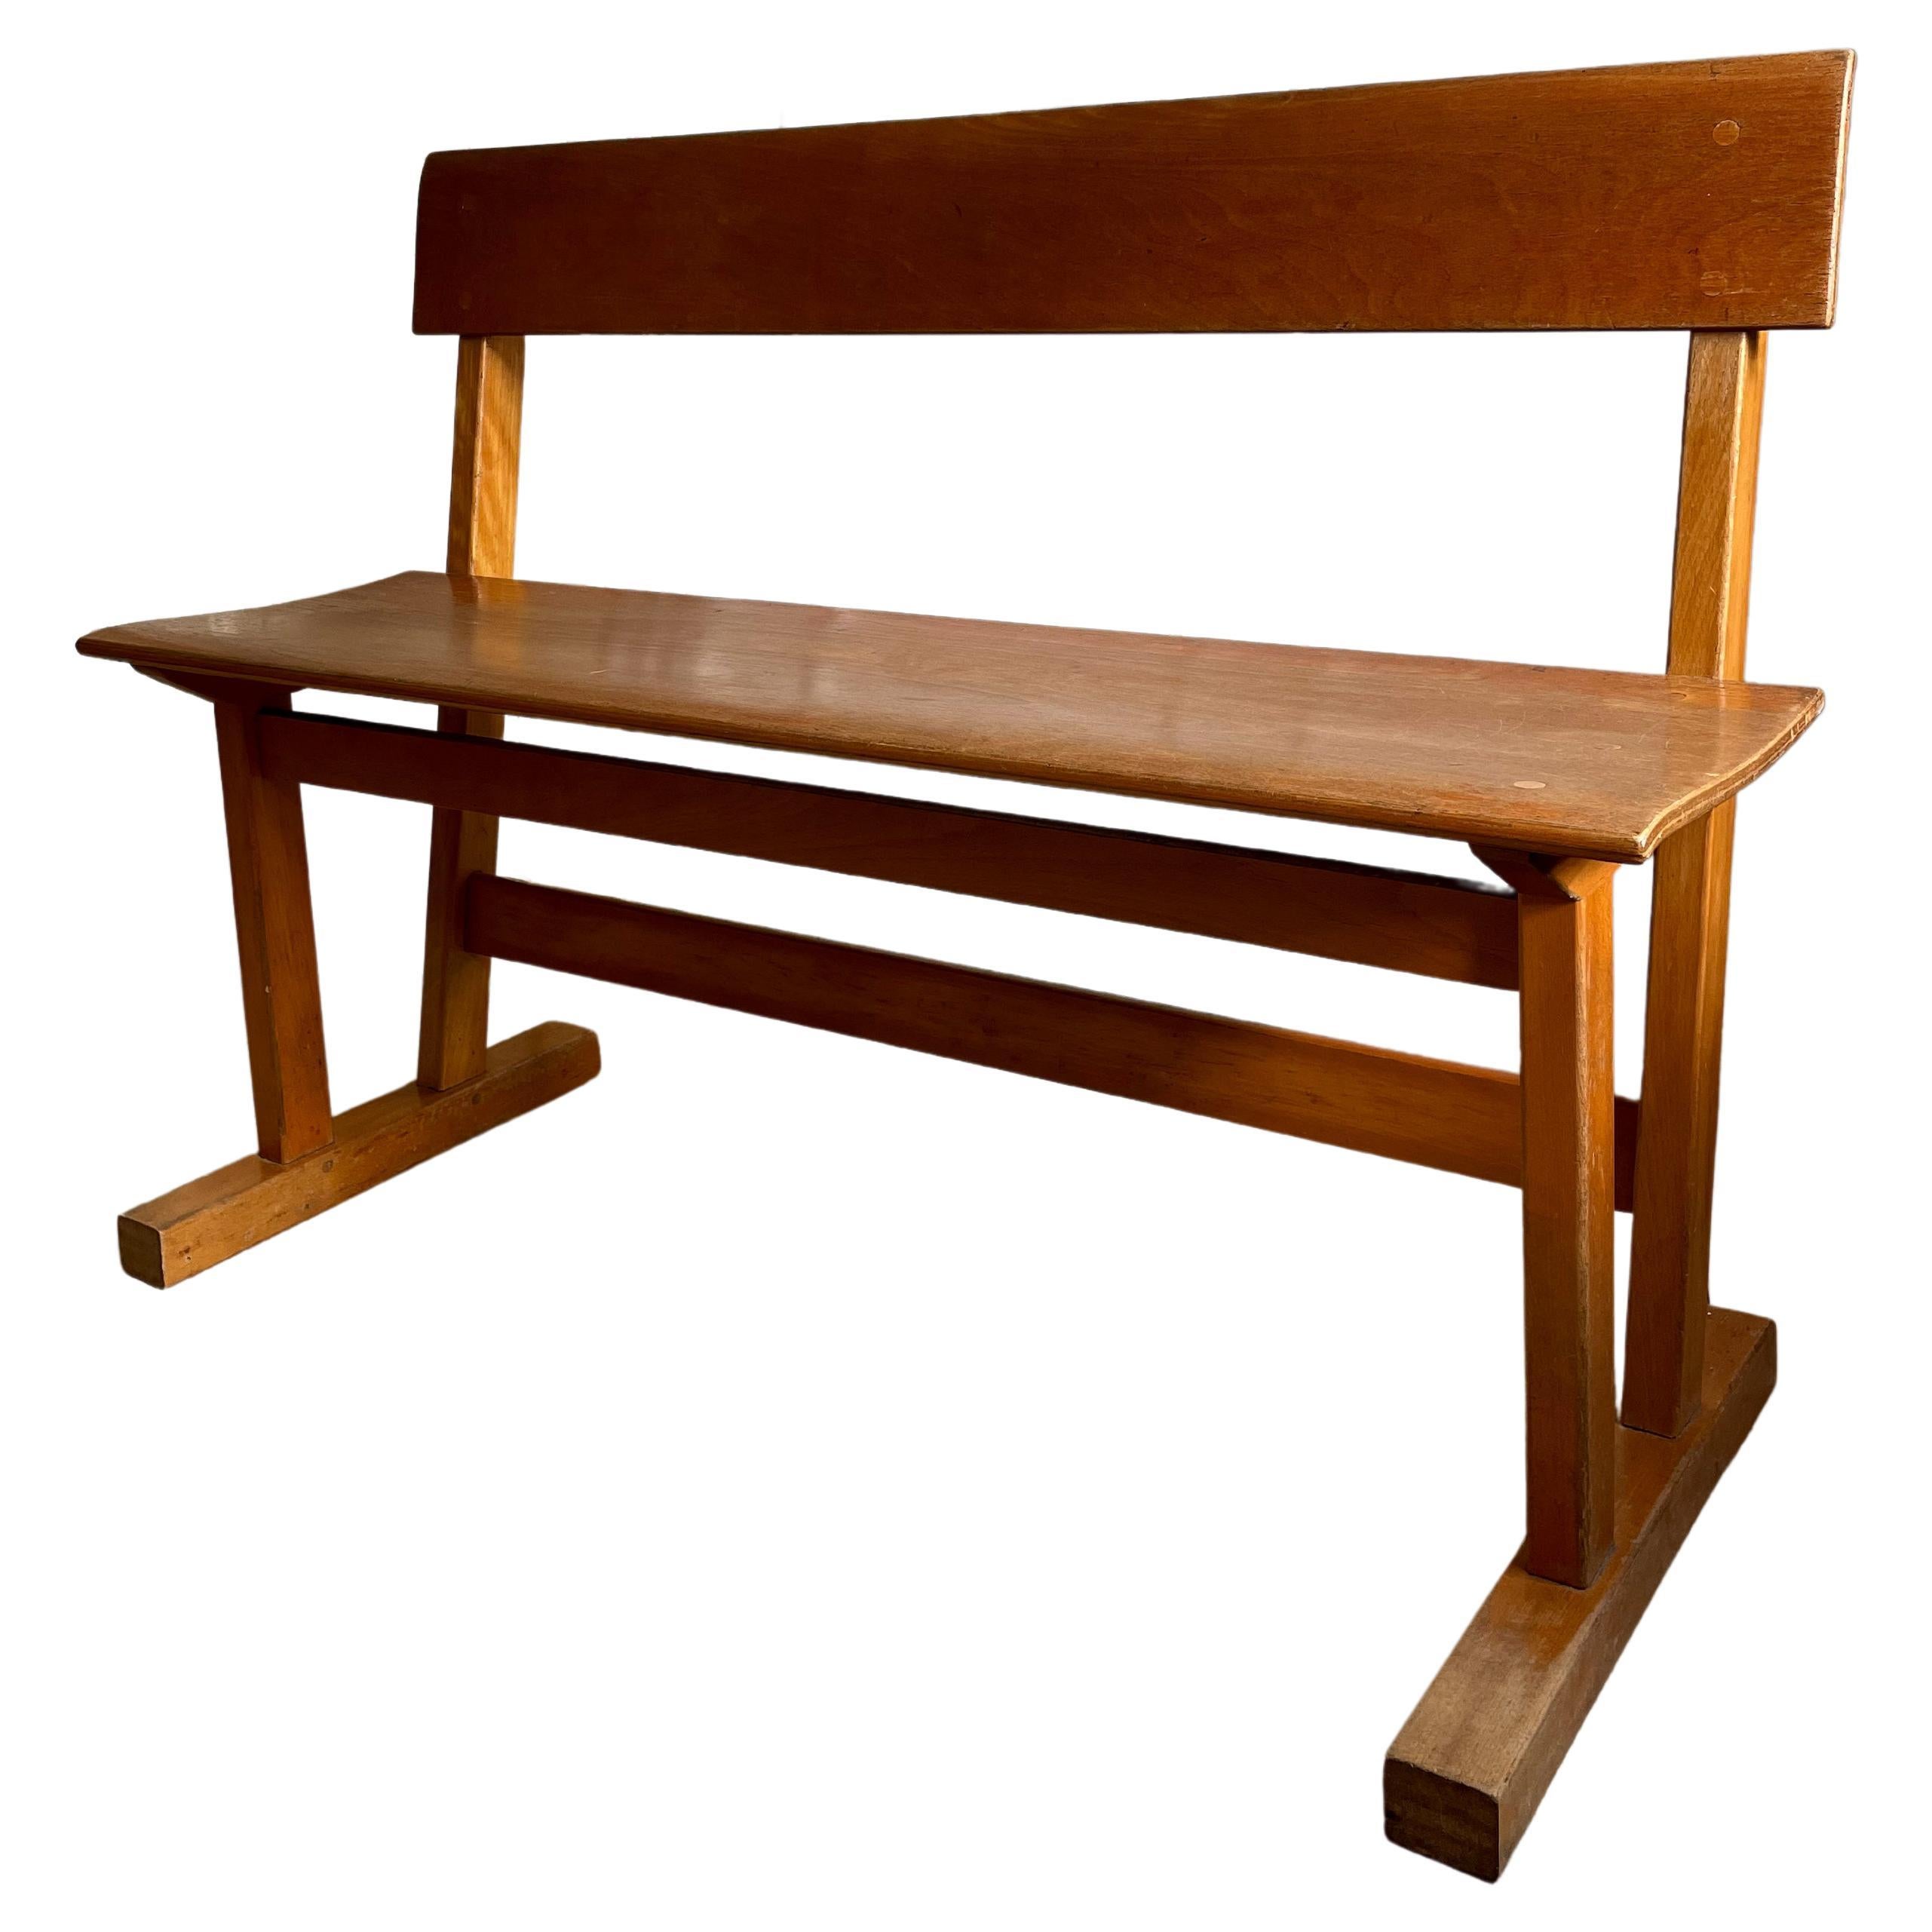 Danish Modern Hand-Crafted Wooden Bench, 1950s For Sale